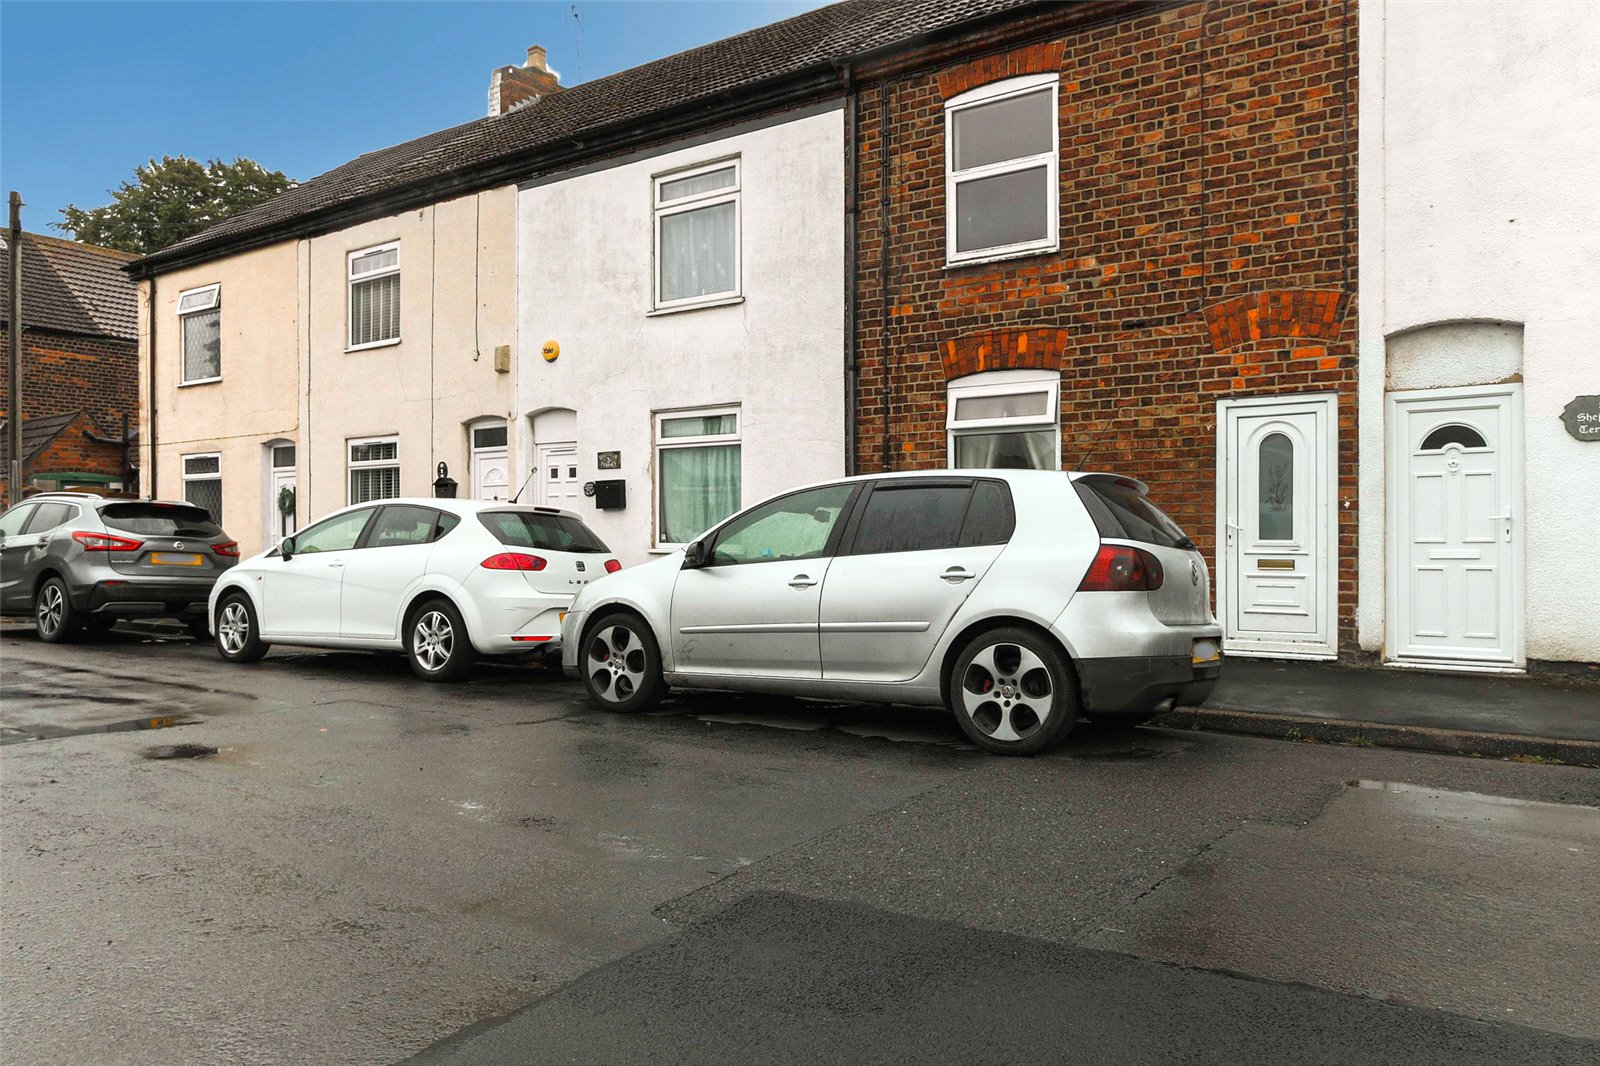 3 bed house for sale in School Lane, New Holland - Property Image 1